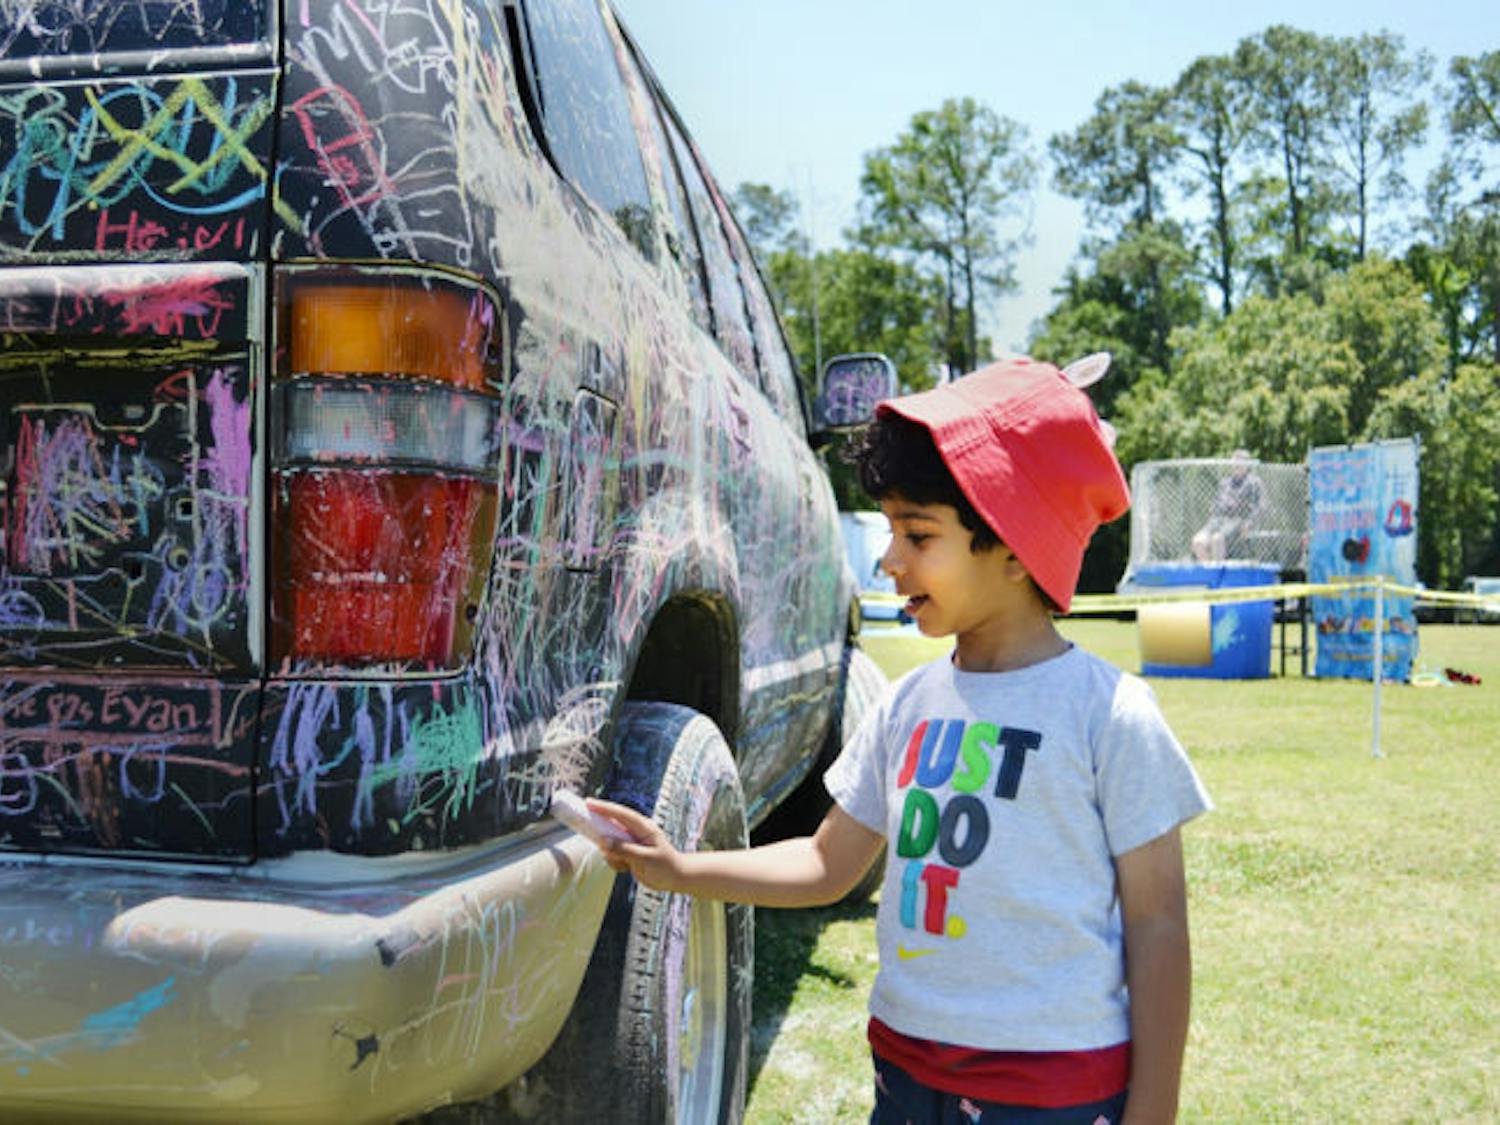 Majeed Aljabhan, 3, smiles as he draws a heart on a SUV painted like a chalkboard at the Sweet Dreams’ Touch-a-Truck event Saturday afternoon. The event provided hands-on play on trucks for children and adults.